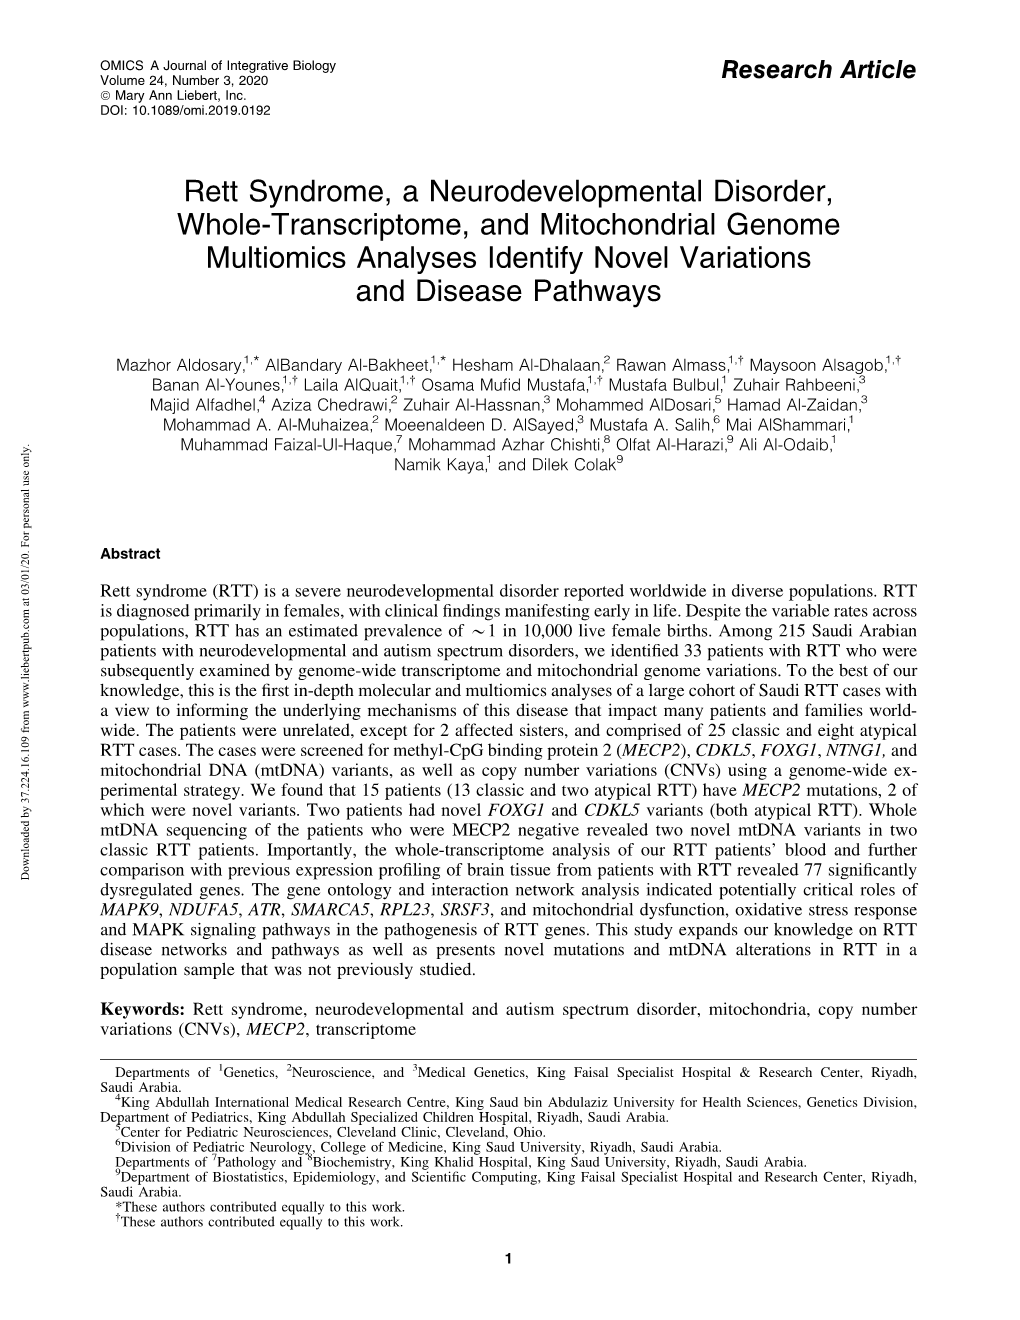 Rett Syndrome, a Neurodevelopmental Disorder, Whole-Transcriptome, and Mitochondrial Genome Multiomics Analyses Identify Novel Variations and Disease Pathways